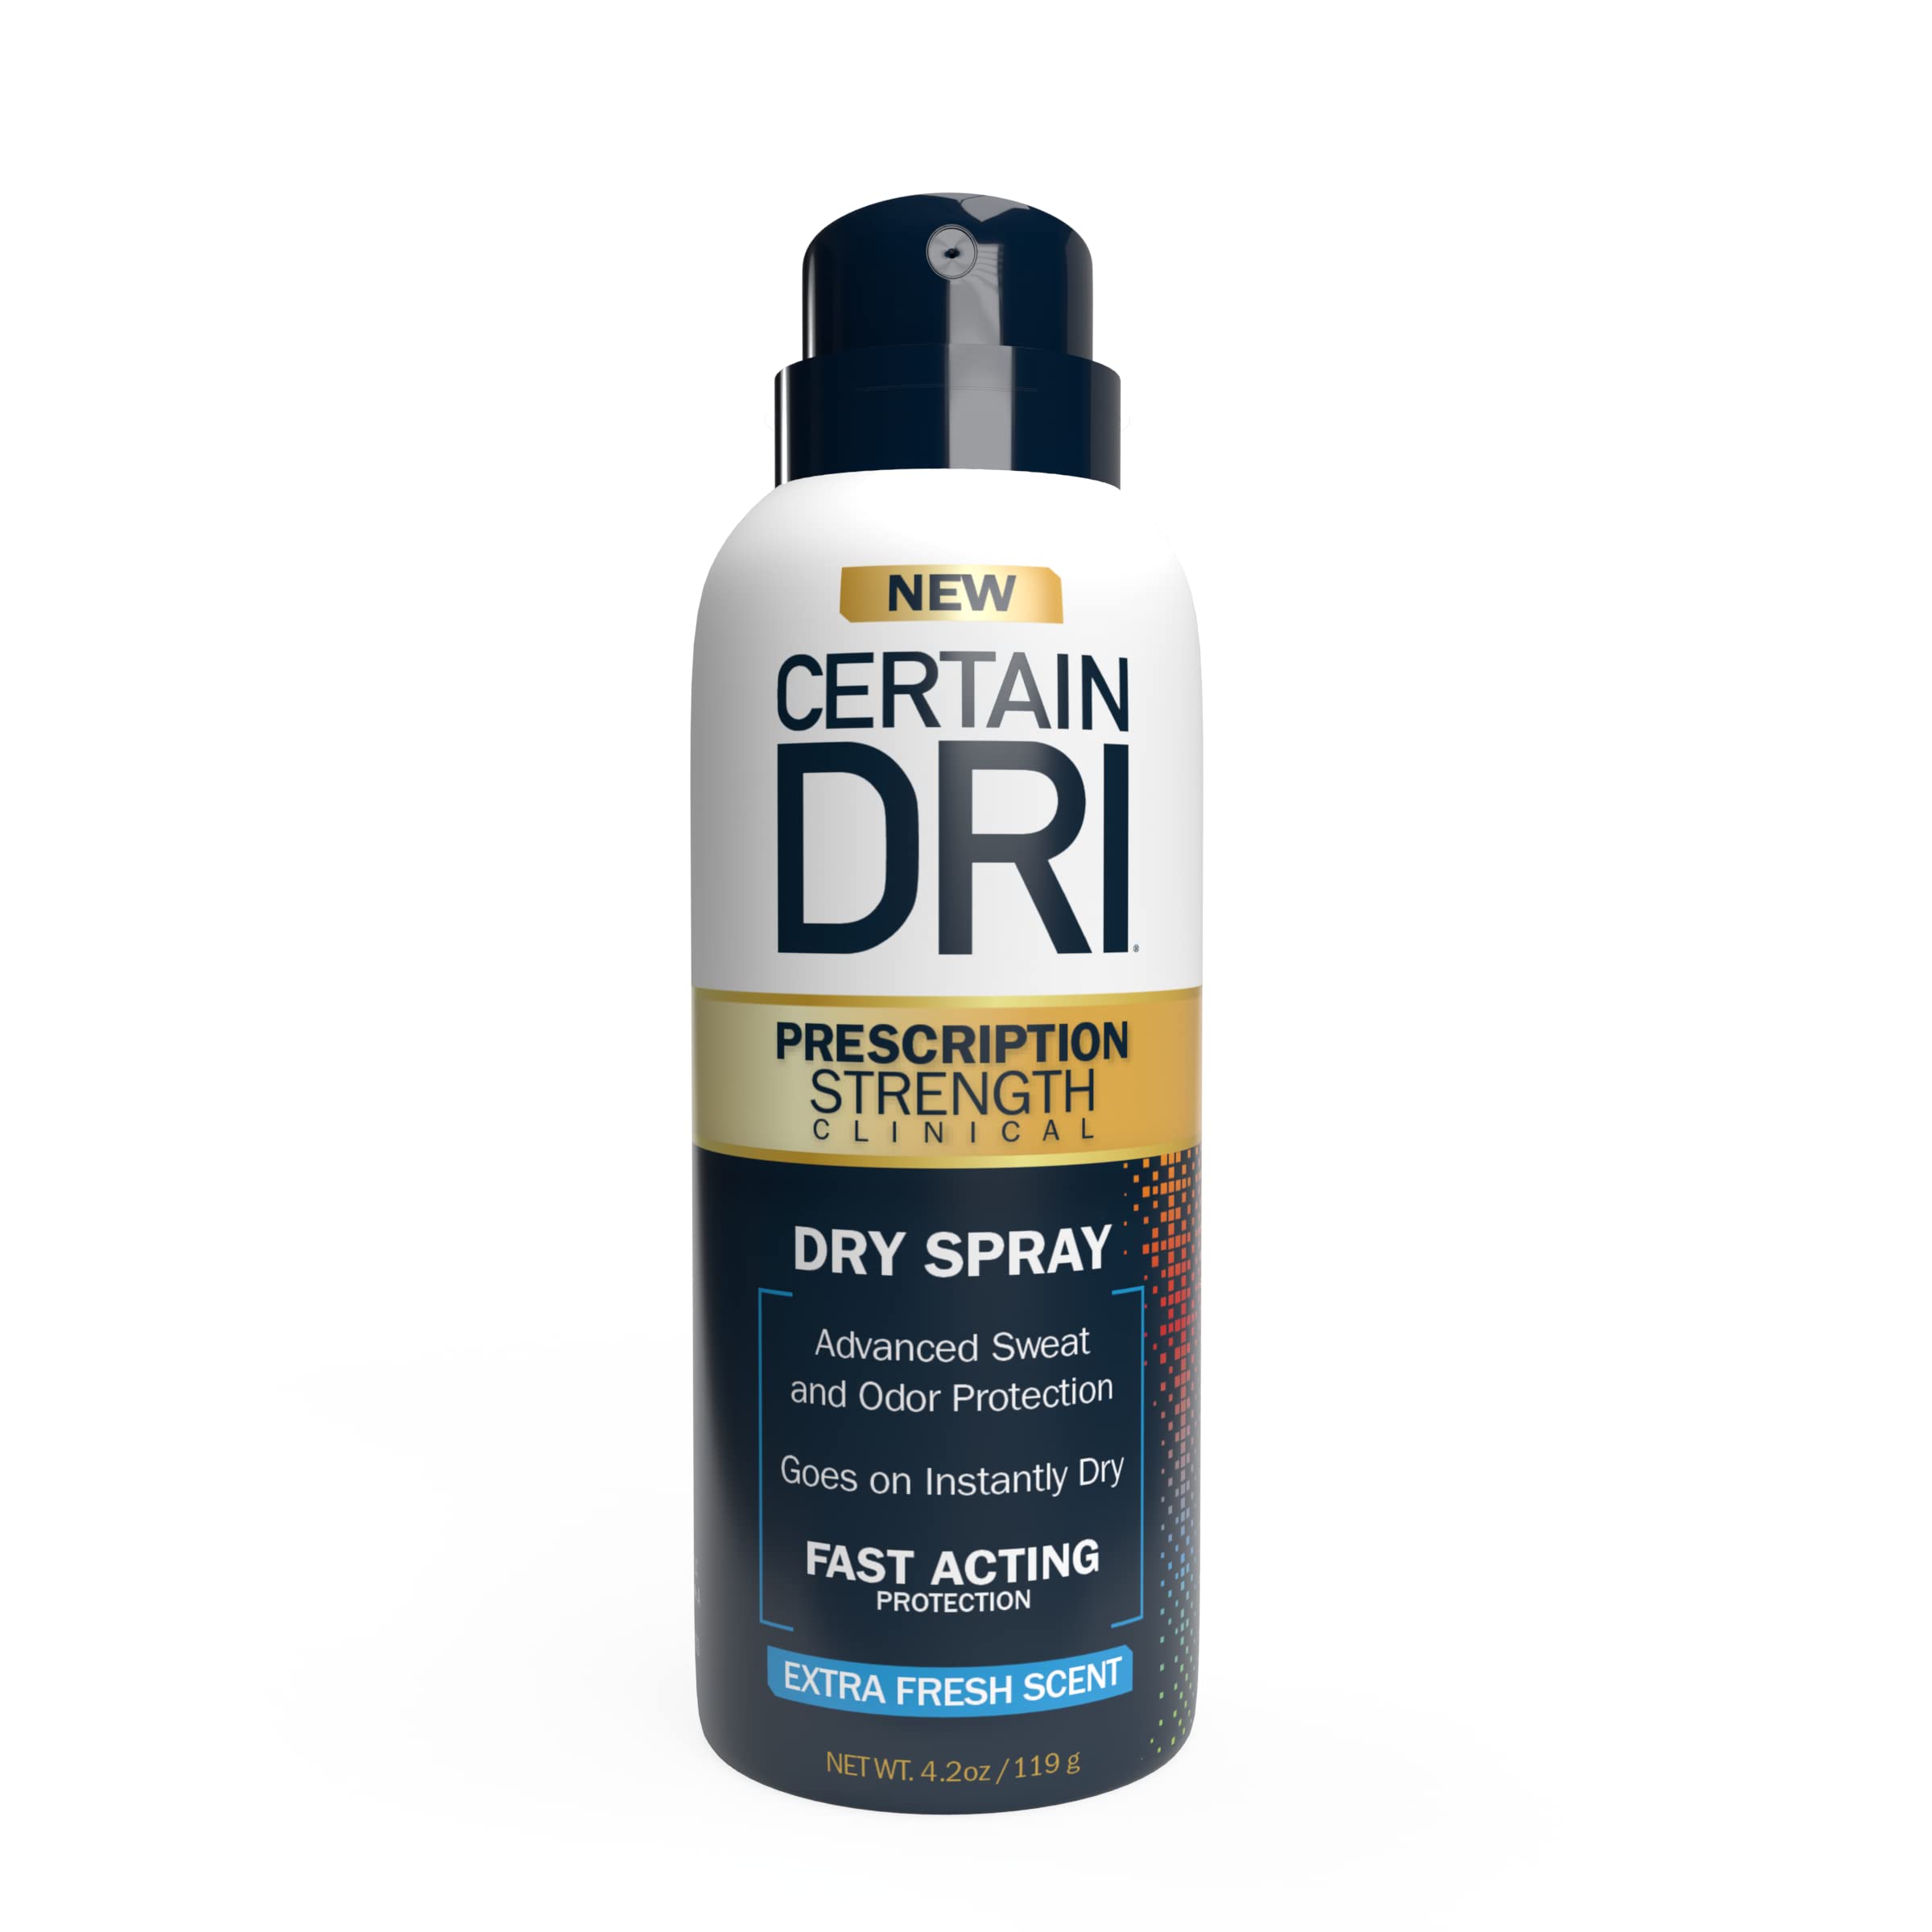 Dri Prescription Clinical Antiperspirant Deodorant Dry for Men and Women (1pk), Fast Acting Protection from Excessive Sweating, 4.2 oz 4.2 Ounce (Pack 1) Dry Spray (New!)